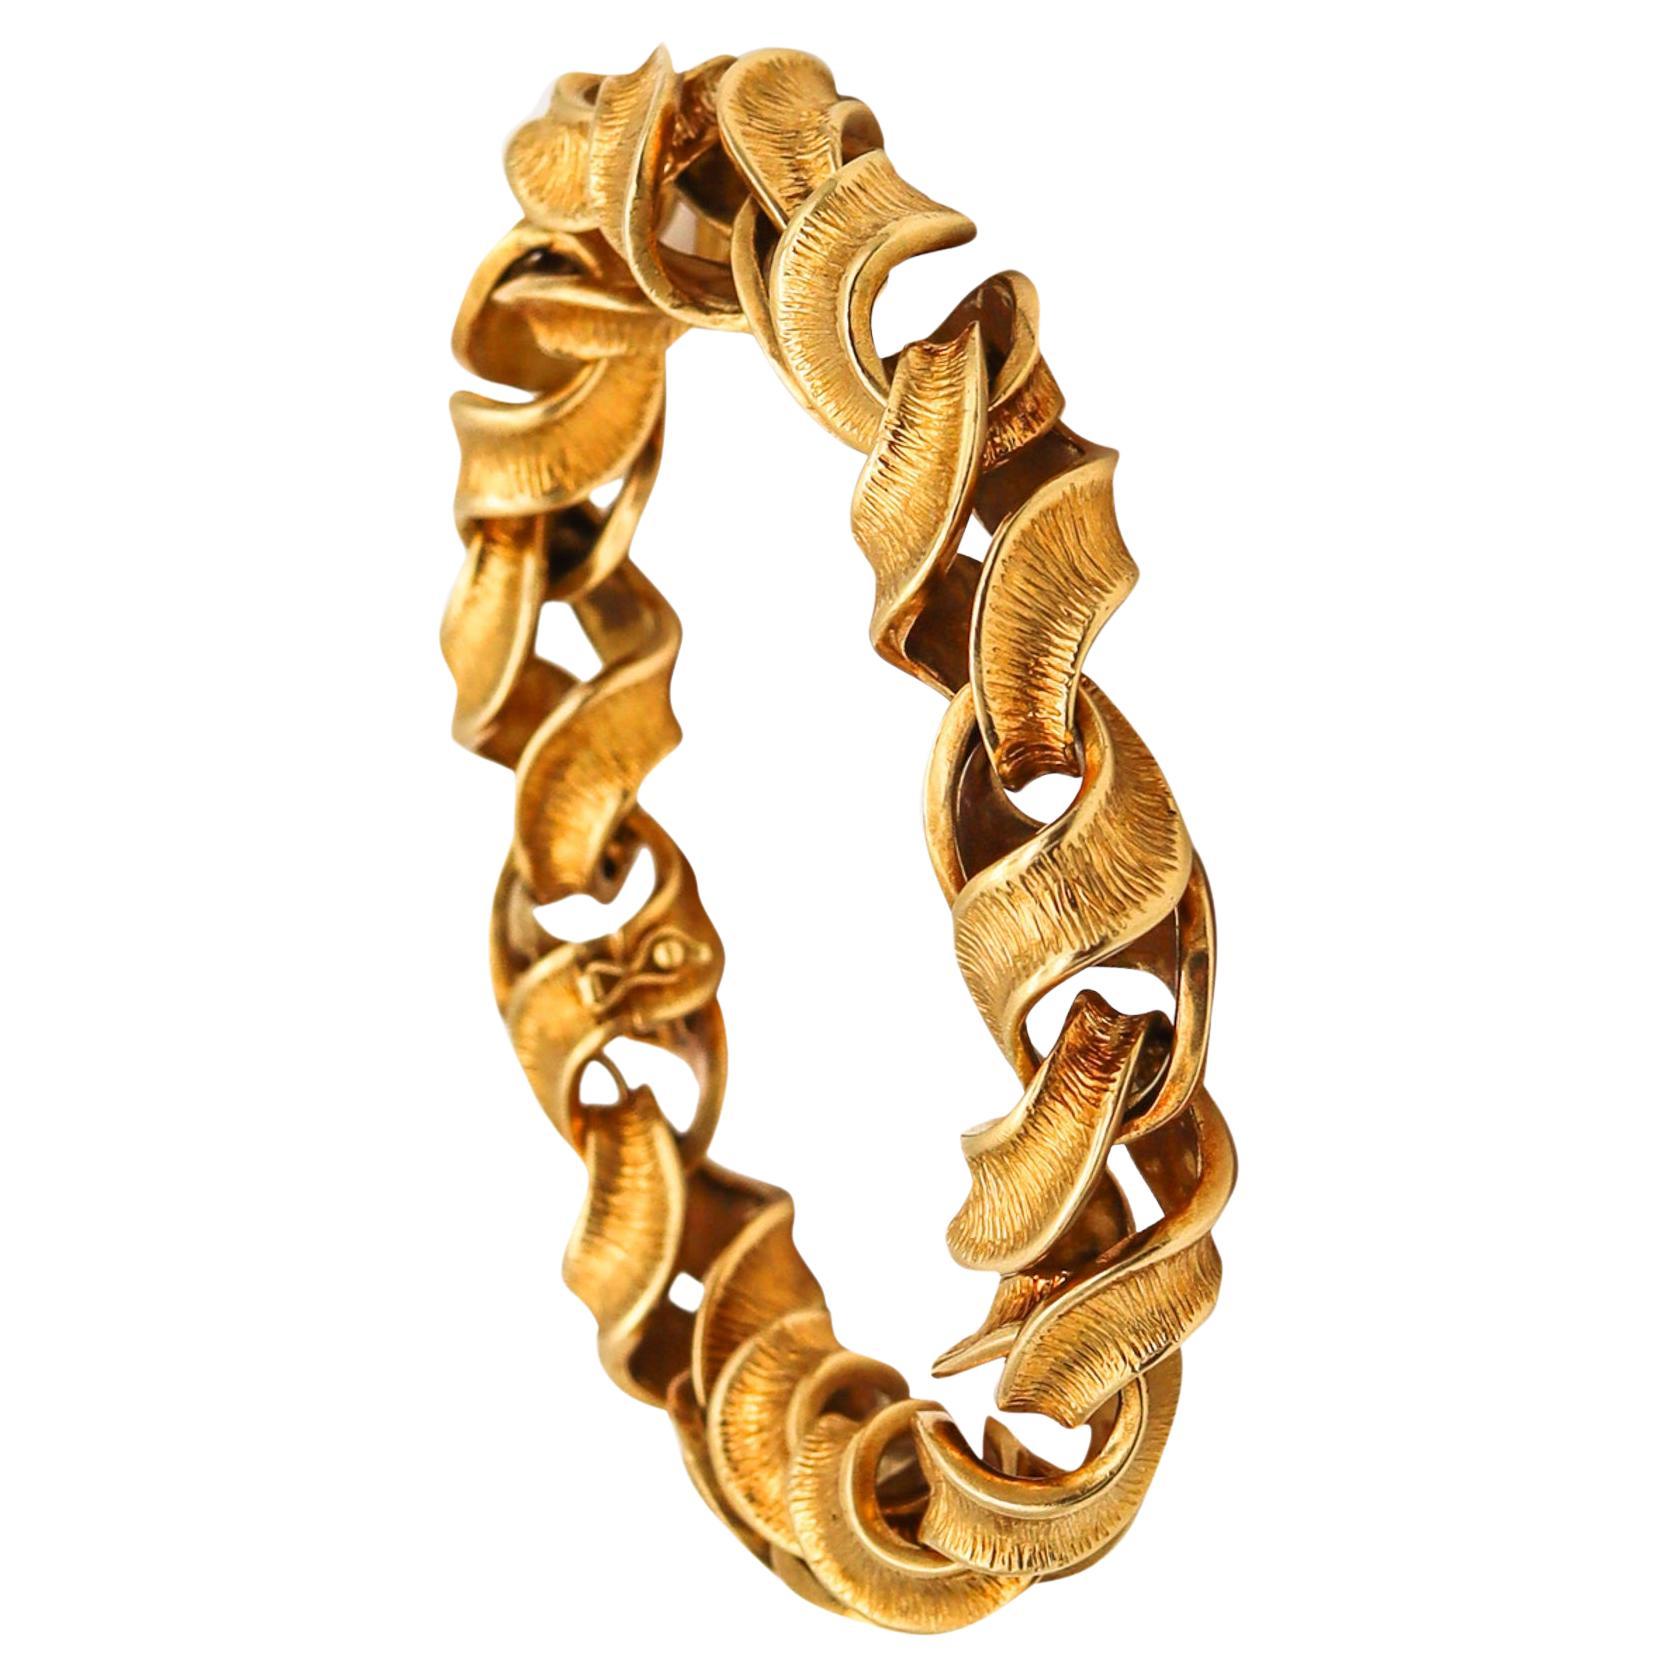 Riccardo Masella 1960 Modernist Twisted Bracelet In Solid 18Kt Yellow Gold